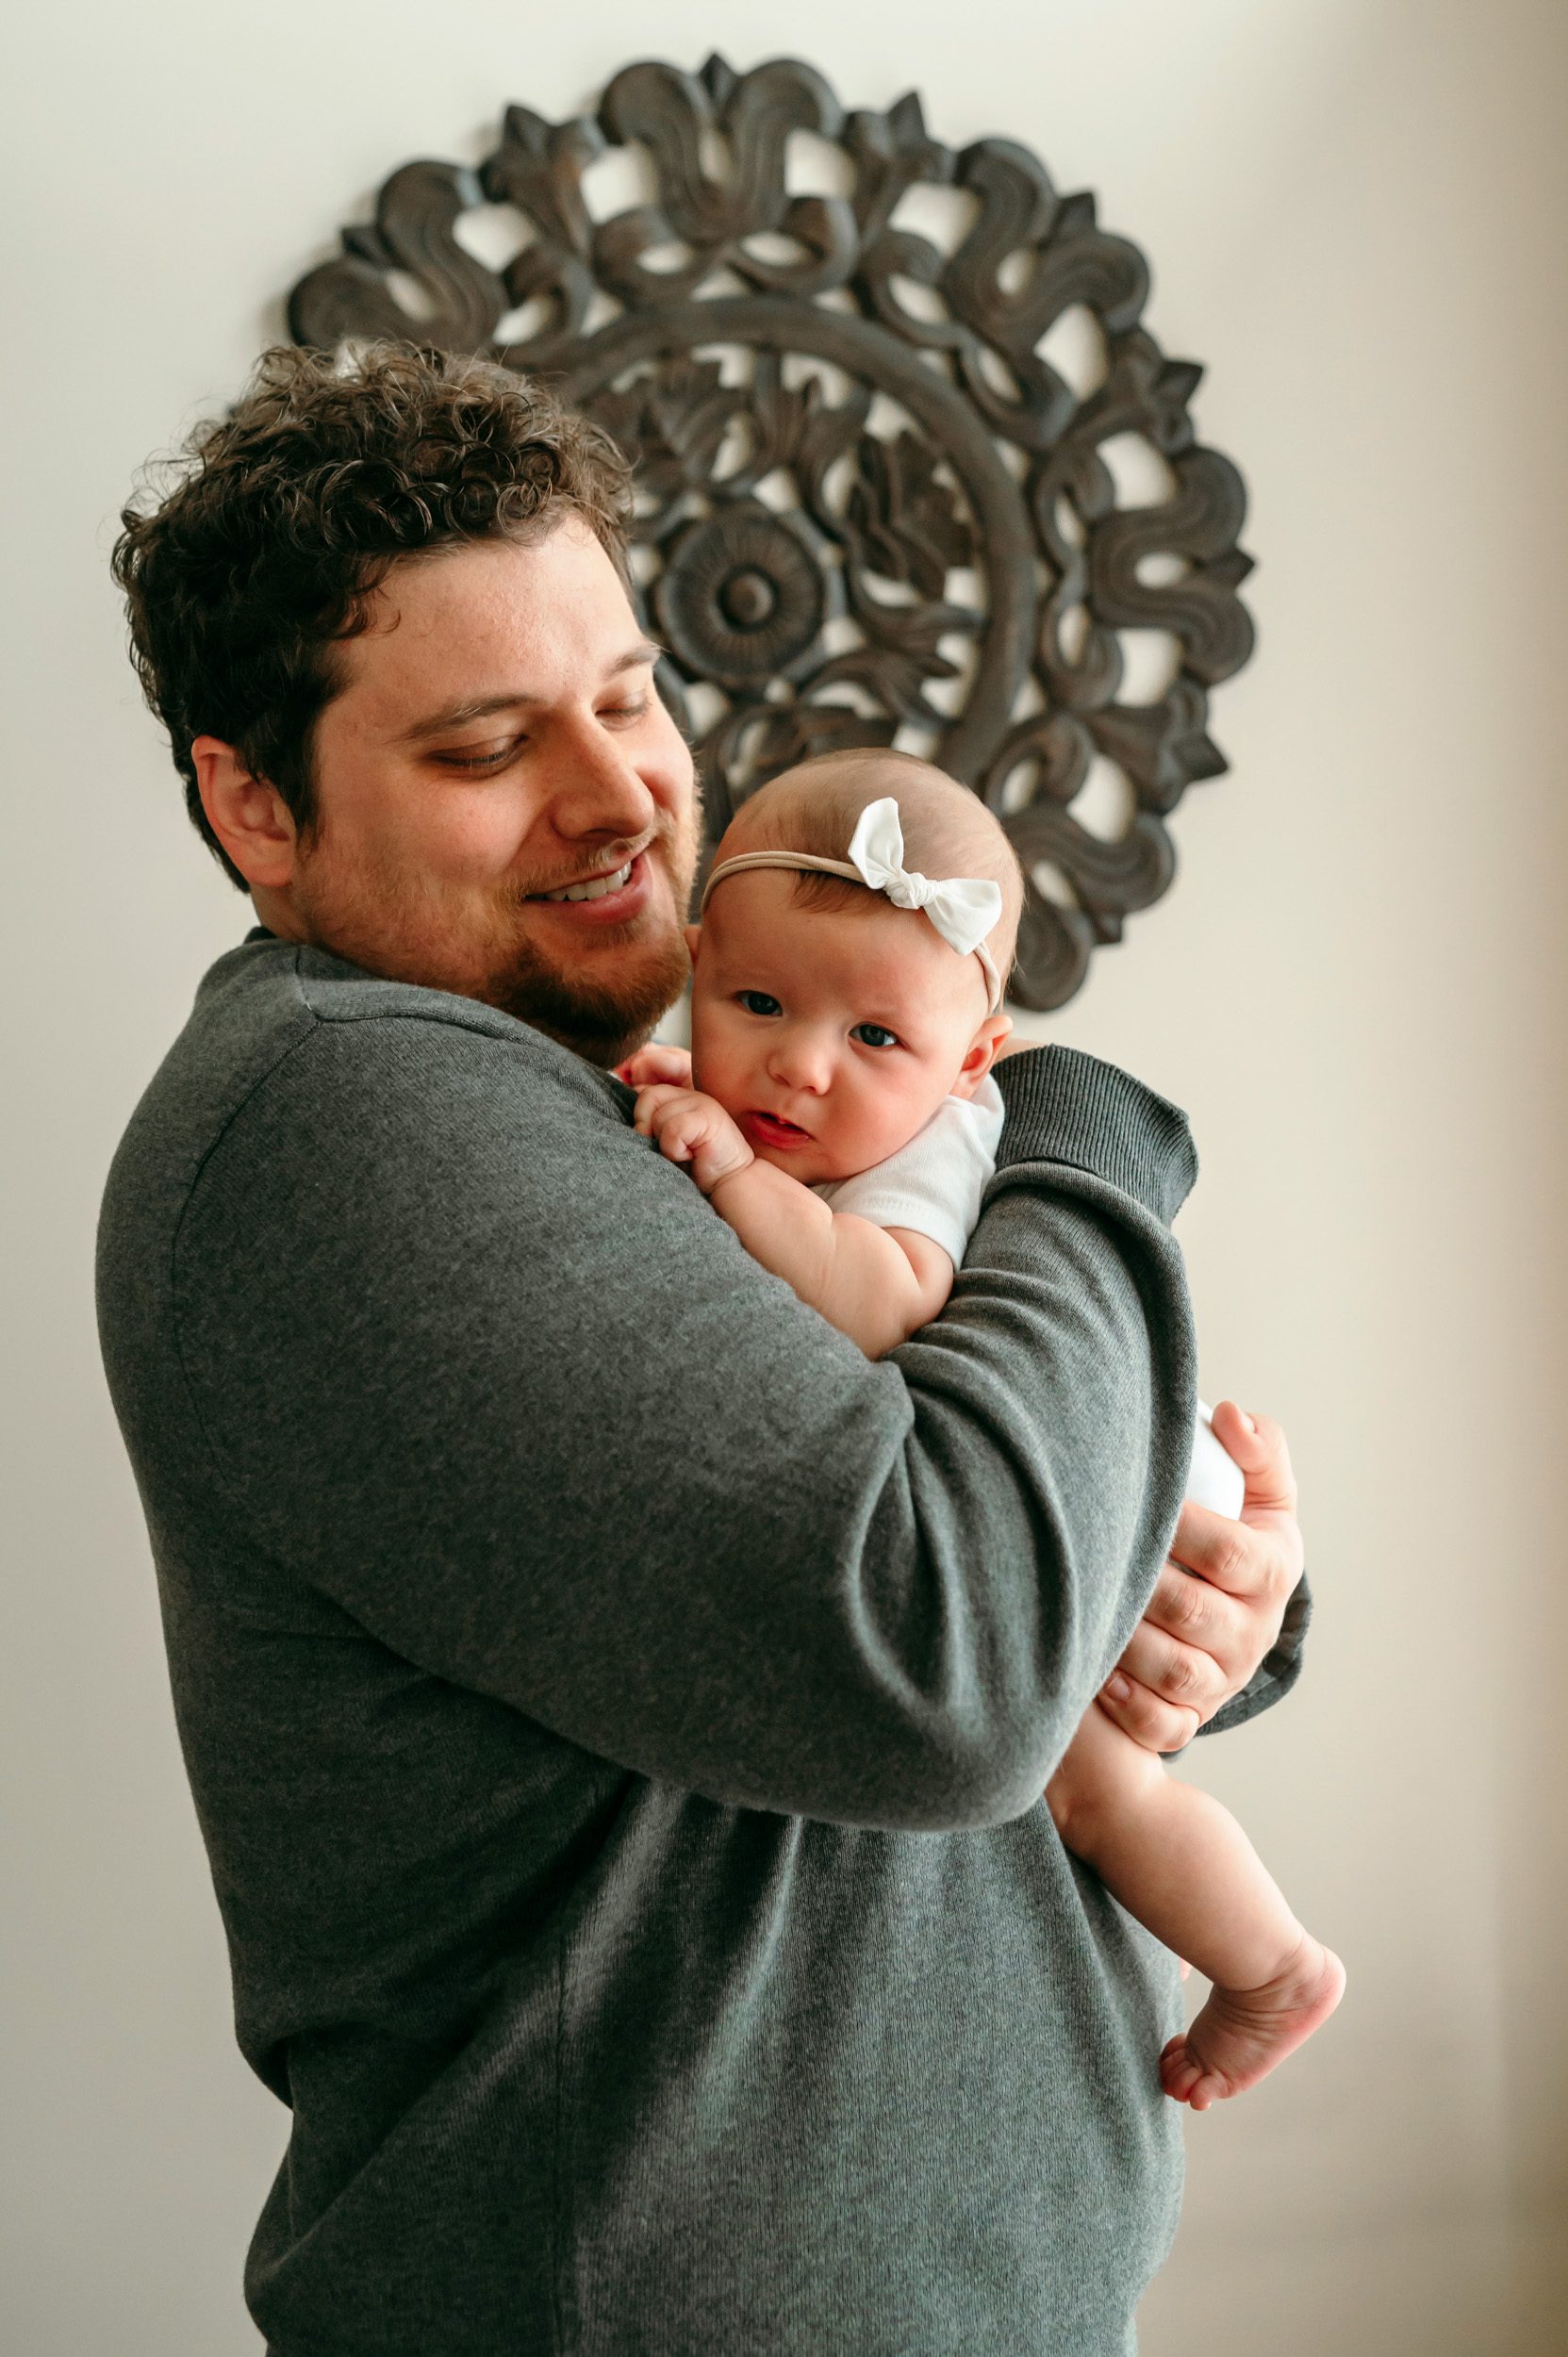 A new dad snuggling his newborn baby girl against his chest during a home newborn photoshoot